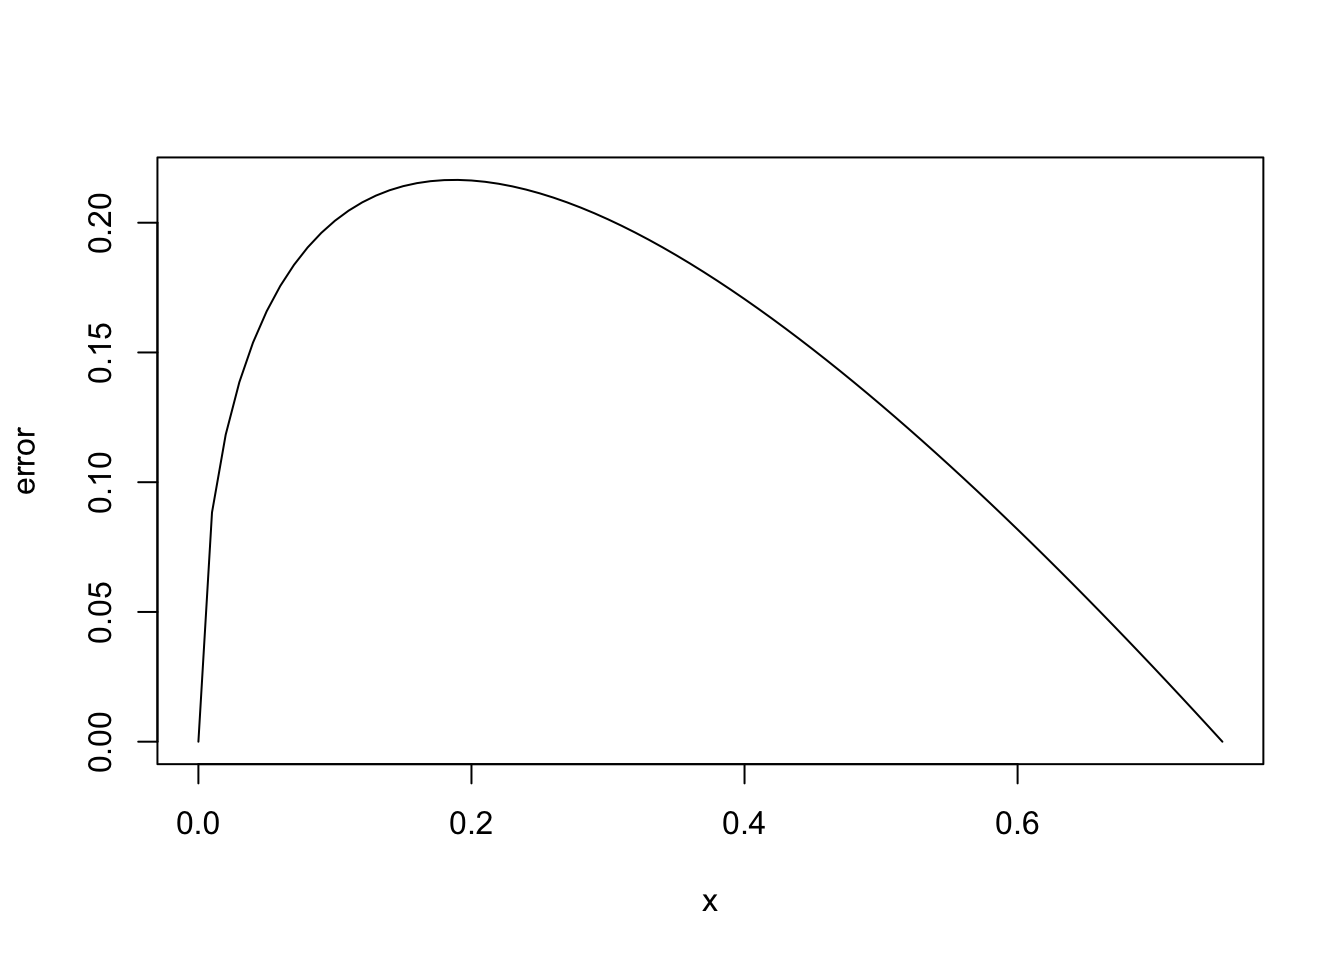 Linear interpolation of $f(x) = \sqrt{x}$ at $x_0 = 0$ and $x_1 = 3/4$